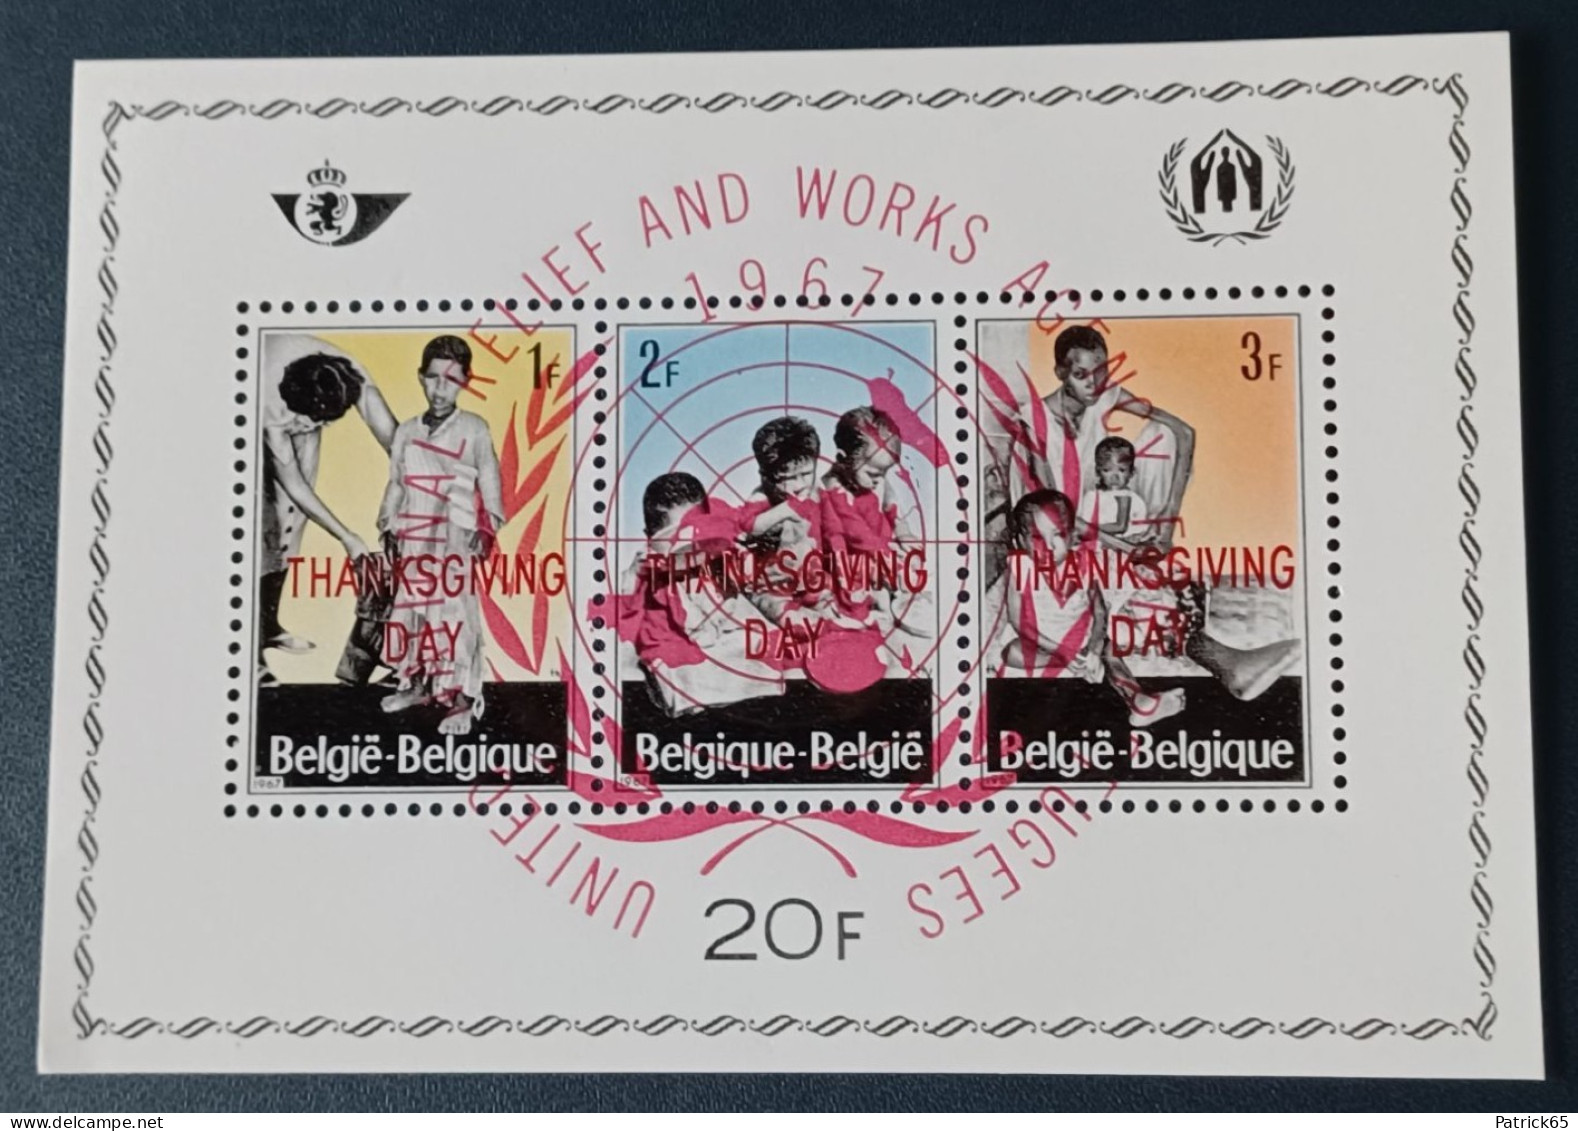 Belgie 1967 Prive Uitgave Obp.Pr.146 Opdruk Thanksgiving Day - MNH-Postfris - Private & Local Mails [PR & LO]